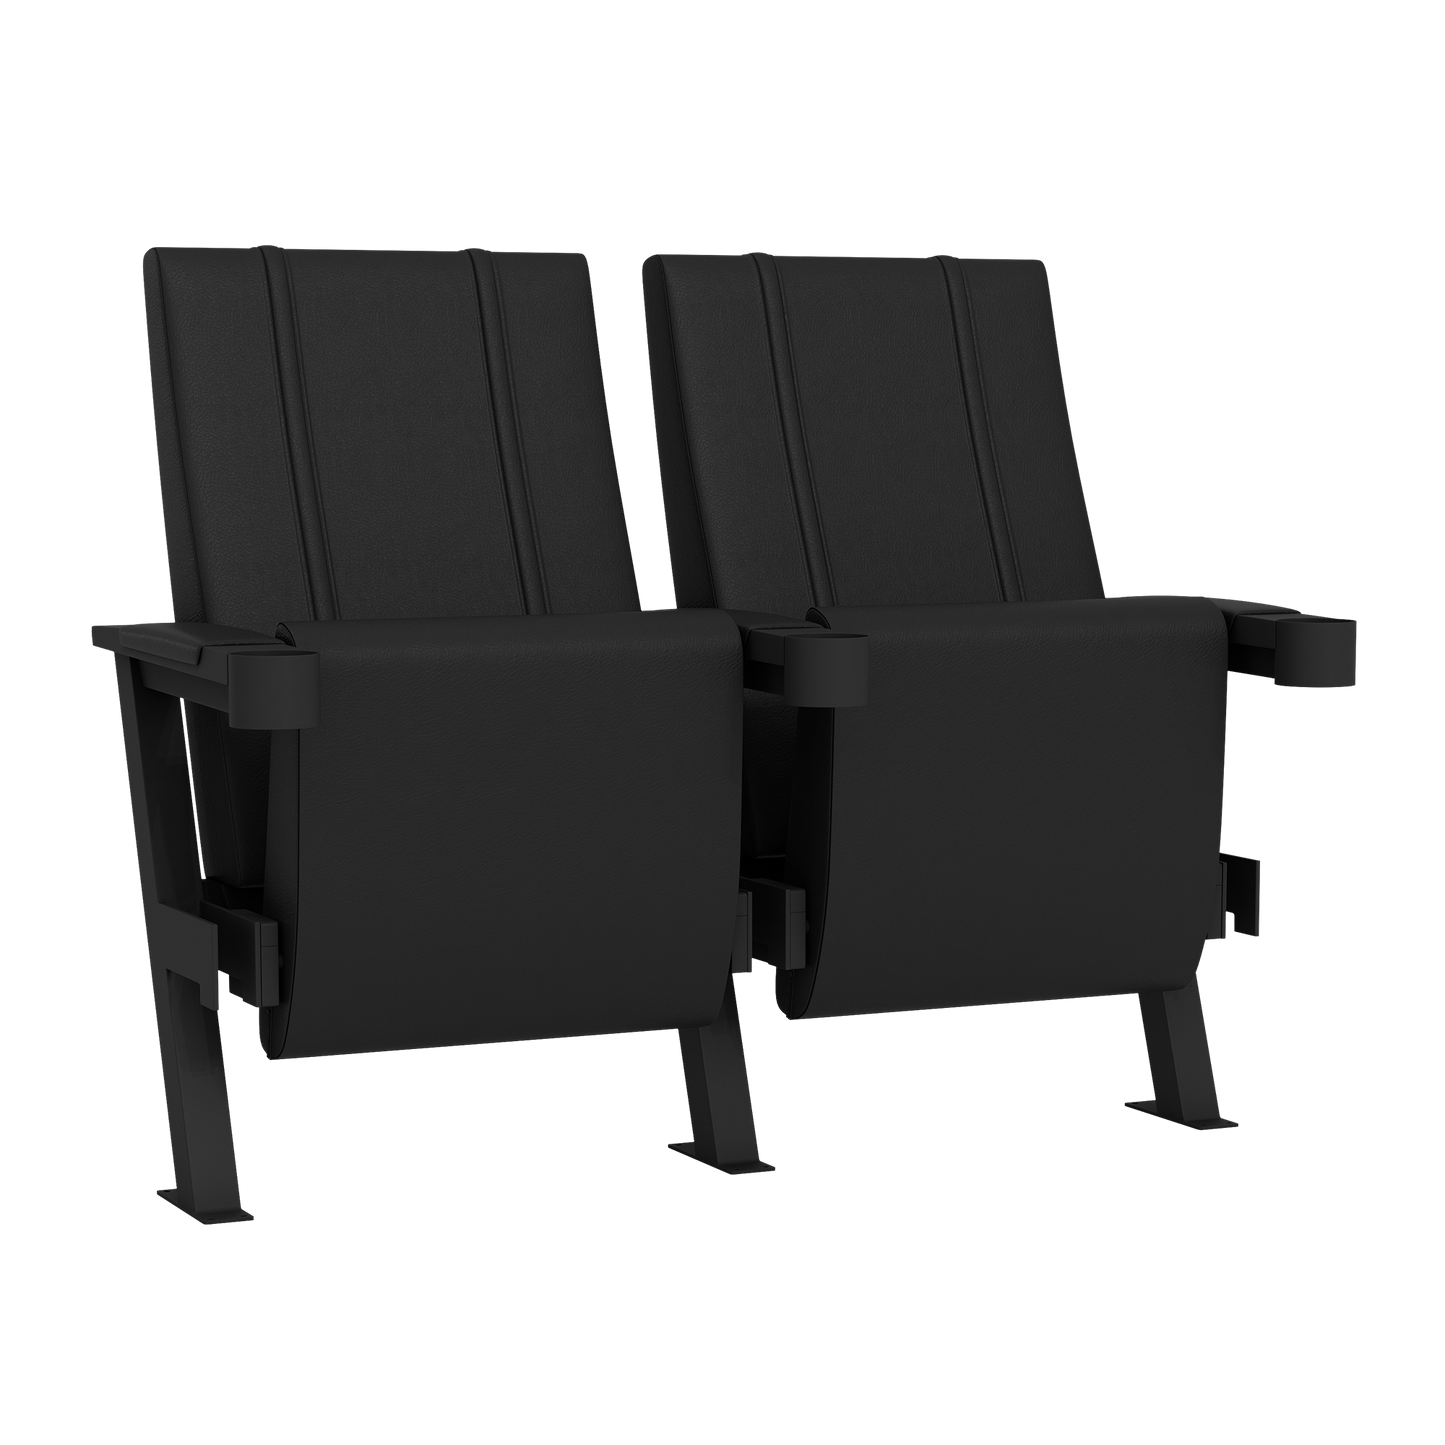 SuiteMax 3.5 VIP Seats with New England Patriots Classic Logo